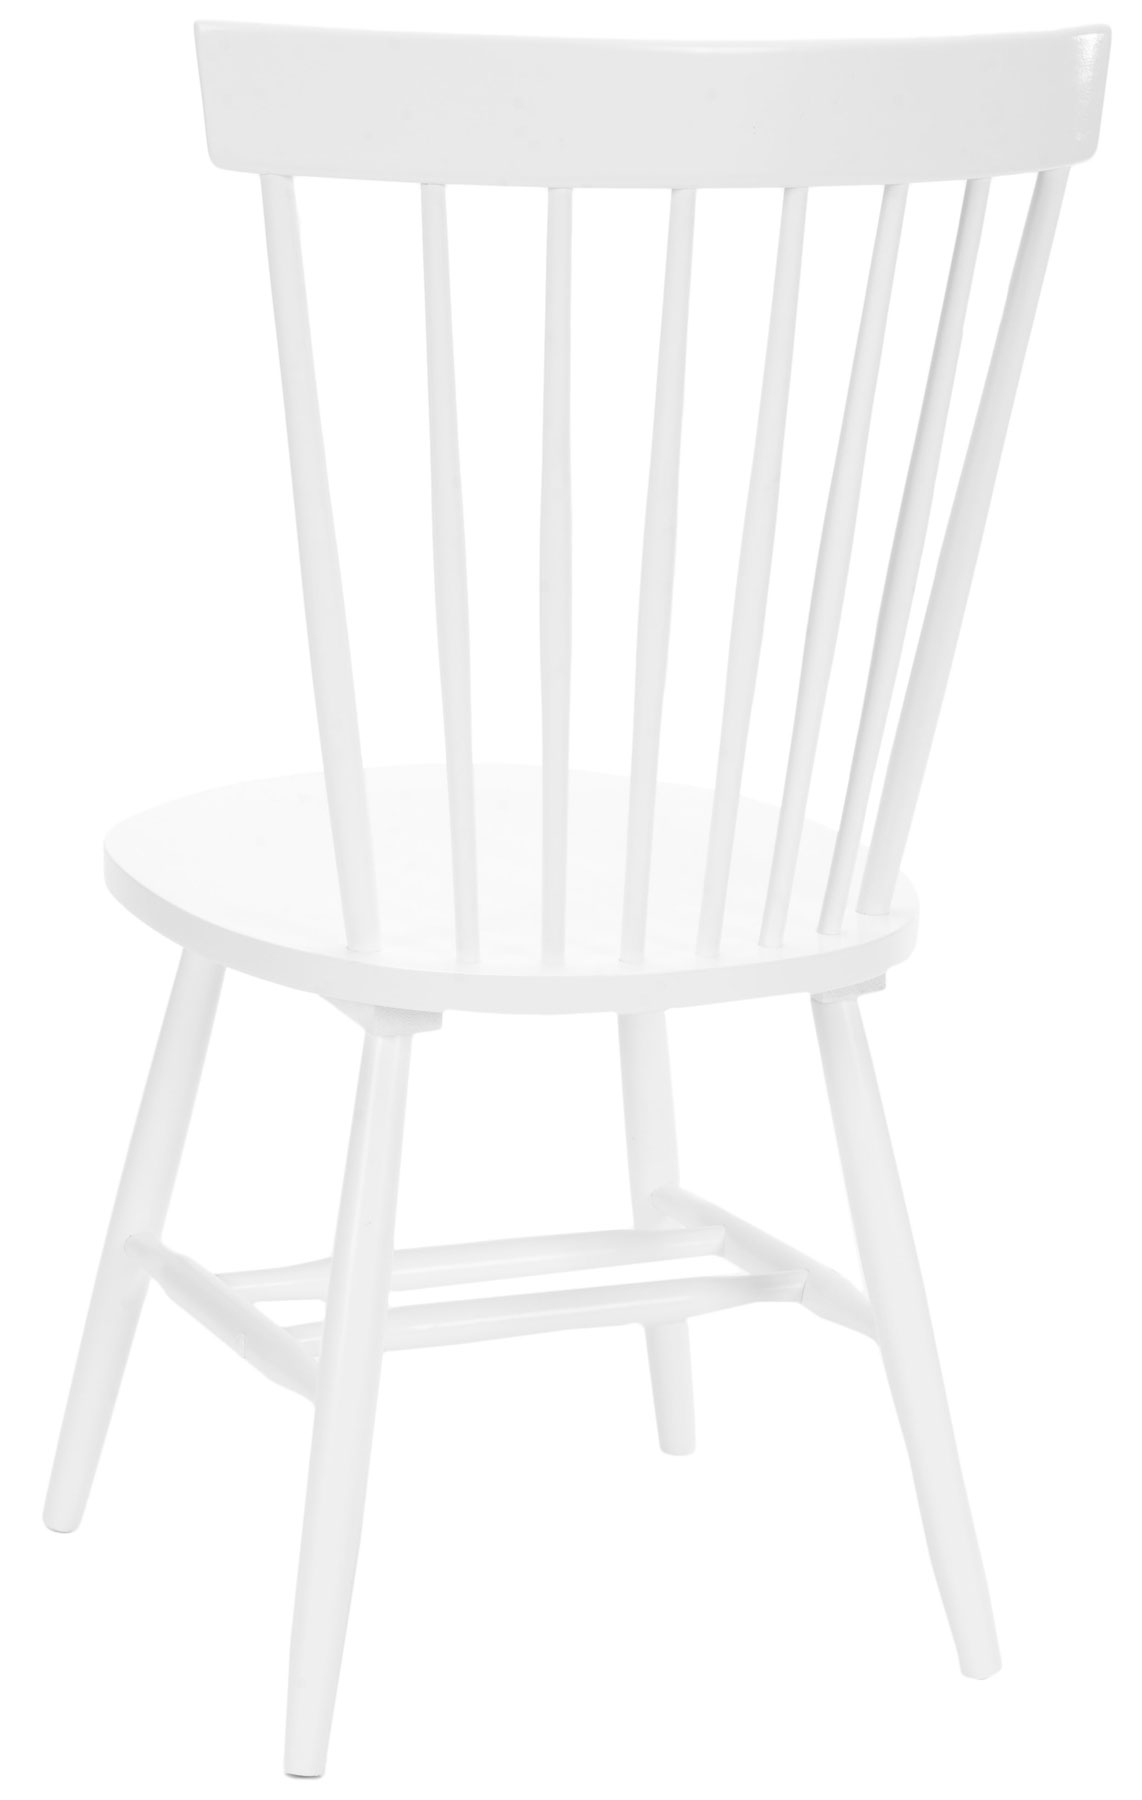 Romy Spindle Dining Chair, White, Set Of 2 - Image 3